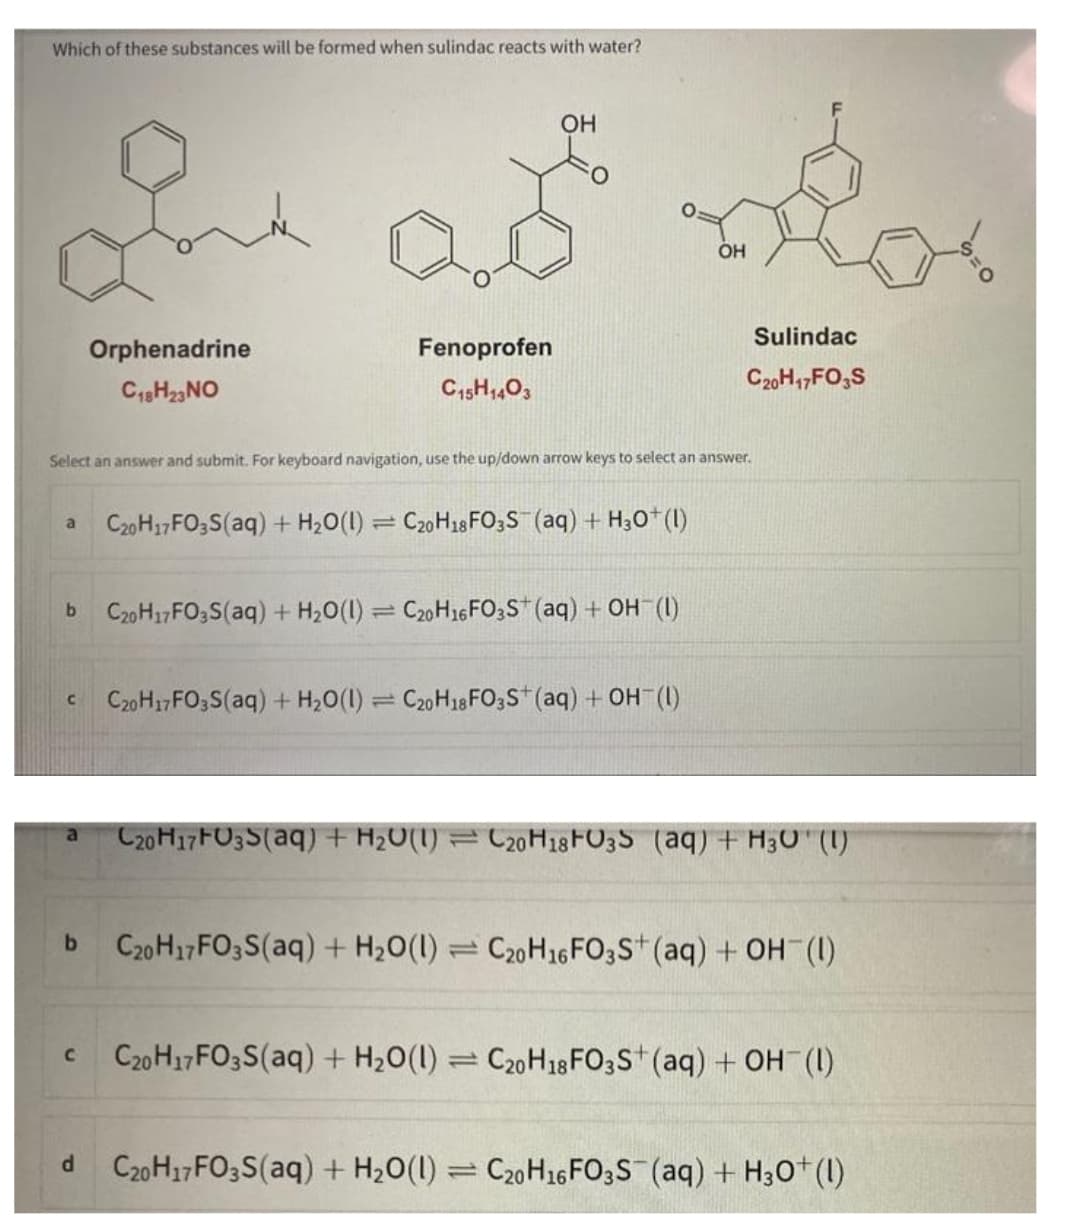 Which of these substances will be formed when sulindac reacts with water?
a
C
b
C
In ad
Orphenadrine
C18H23 NO
Select an answer and submit. For keyboard navigation, use the up/down arrow keys to select an answer.
d
b C20H17FO3S(aq) + H₂O(1) = C20H16 FO3S+ (aq) + OH (1)
OH
Fenoprofen
C15H1403
1
C20H17 FO3S(aq) + H₂O(1) C20H18 FO3S (aq) + H3O+ (1)
=
C20H17 FO3S(aq) + H₂O(1) C20H18 FO3S+ (aq) + OH (1)
OH
Sulindac
C20H17FO3S
C20H17 FU3S(aq) + H₂O(1) = C20H18FO3S (aq) + H₂0 (1)
C20H17 FO3S(aq) + H₂O(1) C20H16 FO3S+ (aq) + OH (1)
C20H17 FO3S(aq) + H₂O(1) = C20H18 FO3S+ (aq) + OH (1)
C20H17 FO3S(aq) + H₂O(1) = C20H16 FO3S (aq) + H3O+ (1)